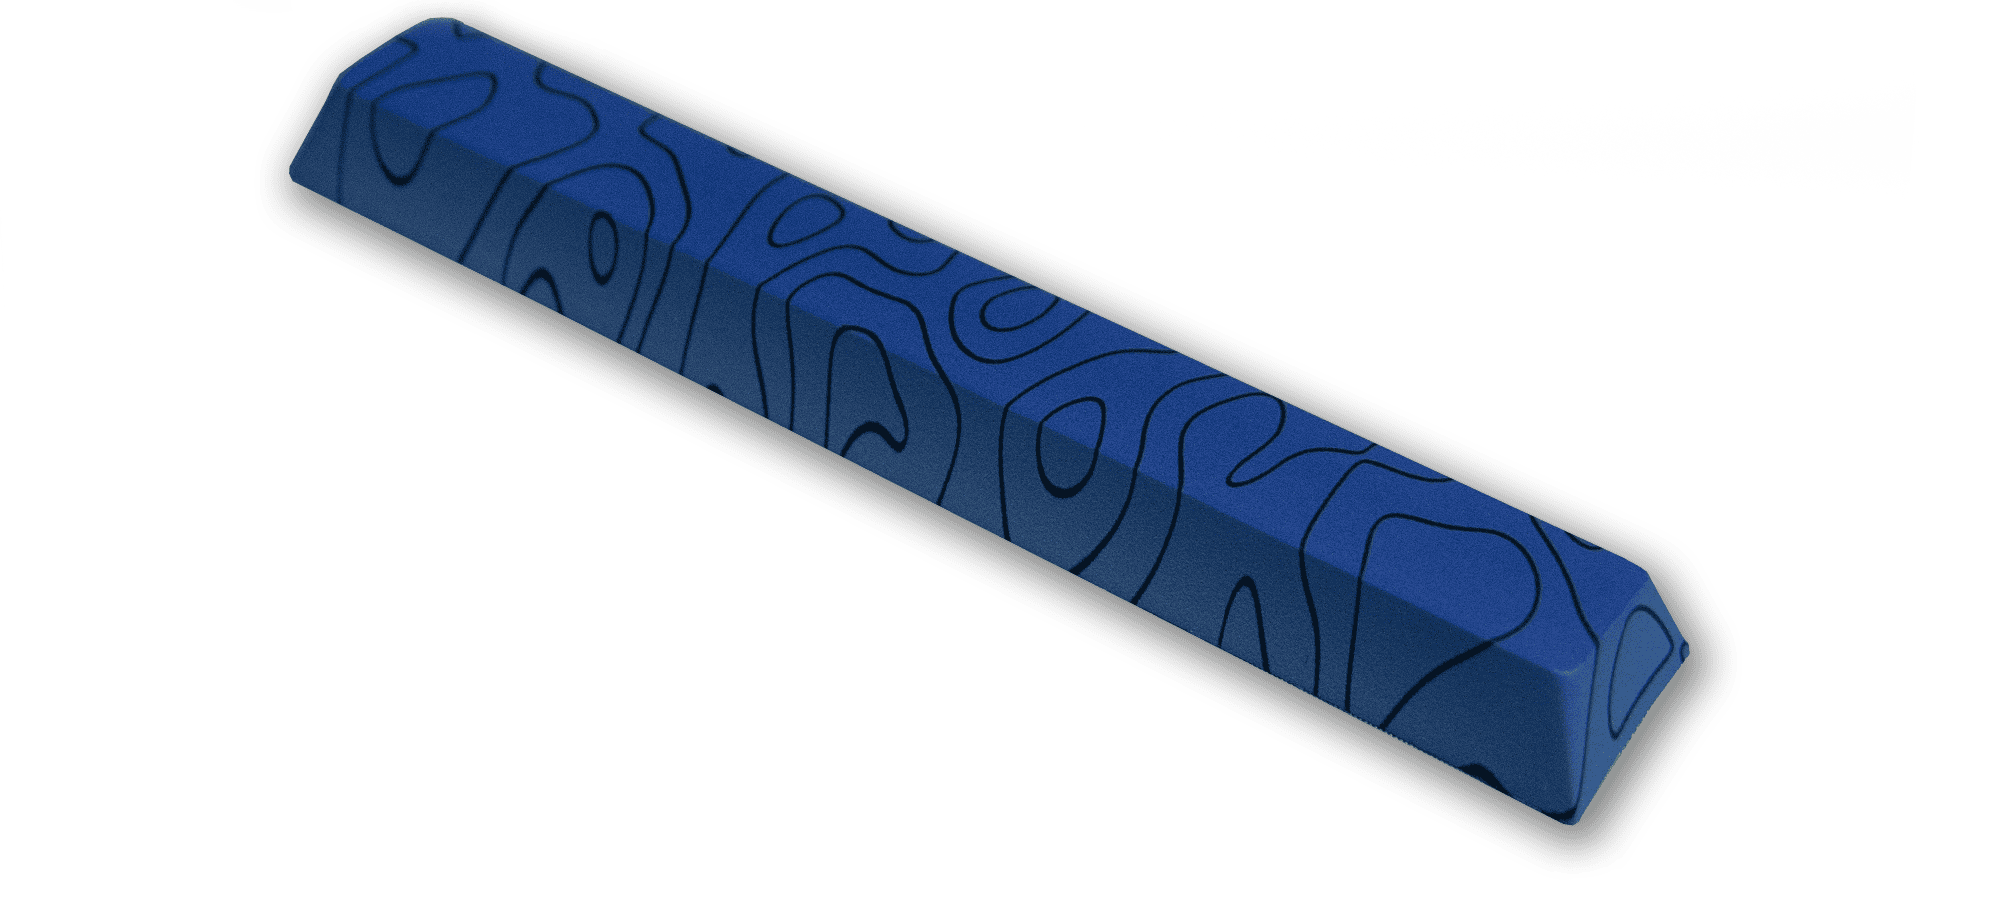 Blue topography spacebar 45 degree angle view